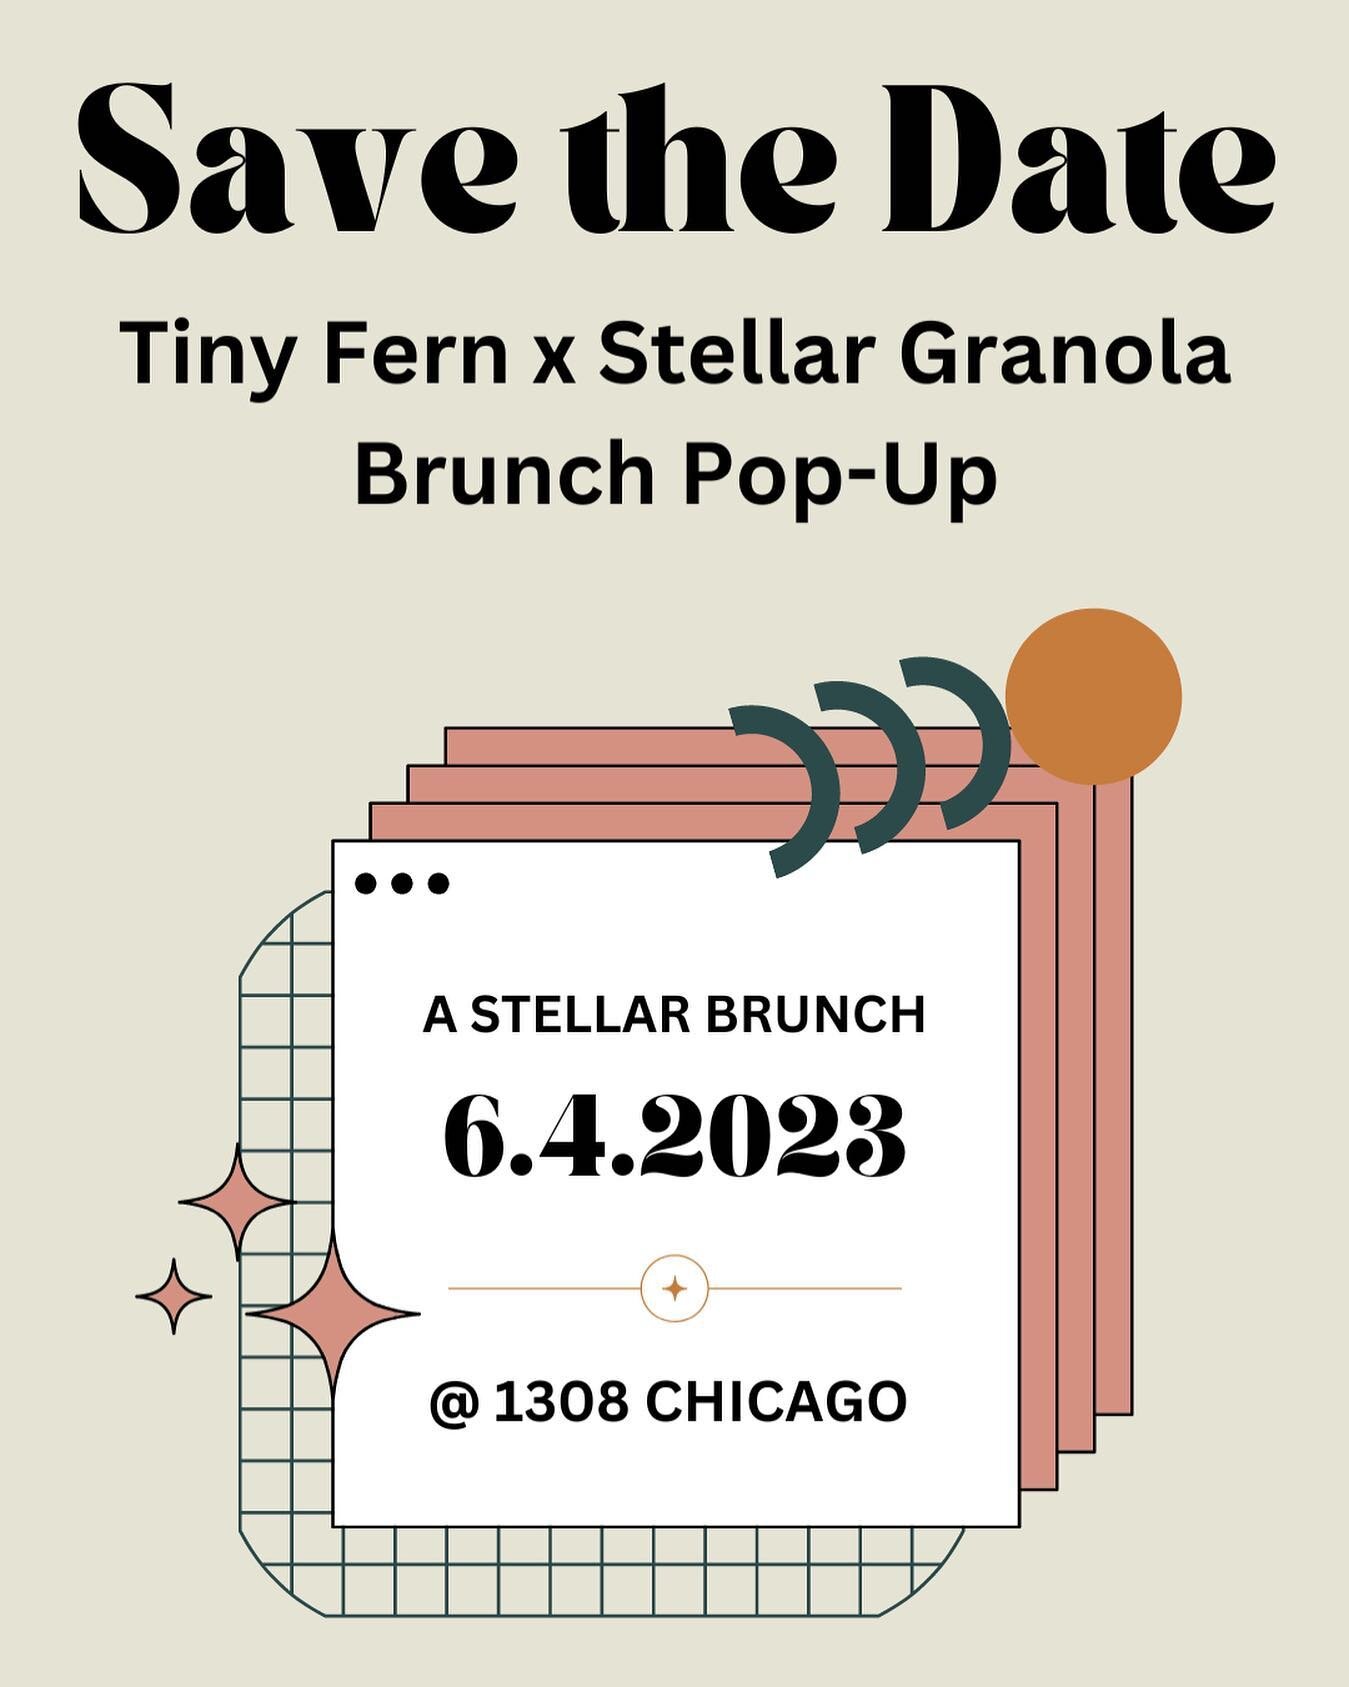 You&rsquo;re officially invited! We are teaming up with @tinyfernsupperclub for a Brunch Pop-up! ✨

Chefs Chrissy + Jon have put together a 7 course brunch inspired by granola (of course 😎).

✨More details to come but here is what you need to know n